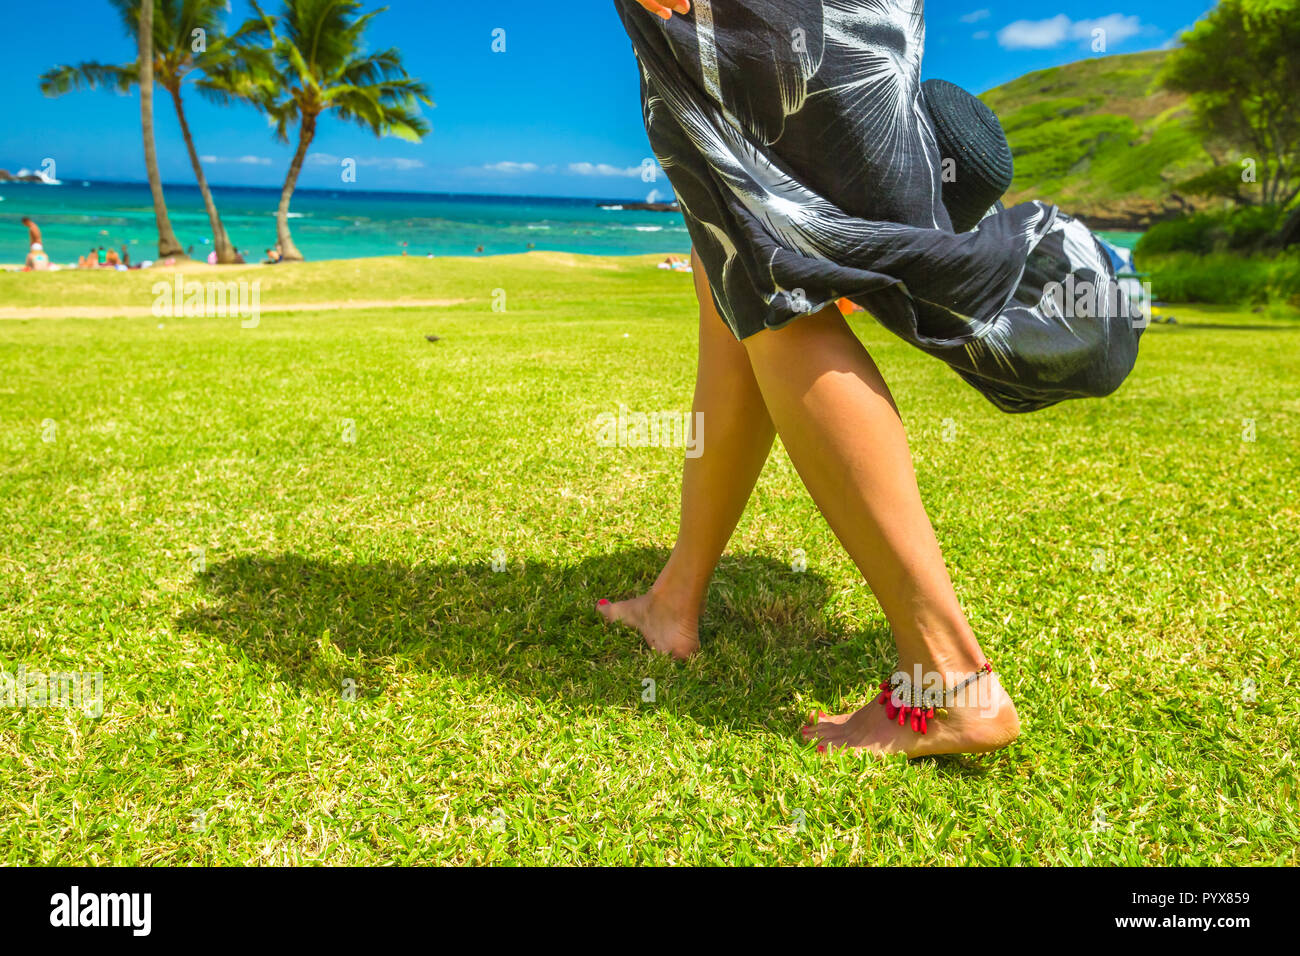 A woman walking barefoot with red anklet on Hanauma Bay Nature Preserve grass, Oahu, Hawaii, United States. Stock Photo